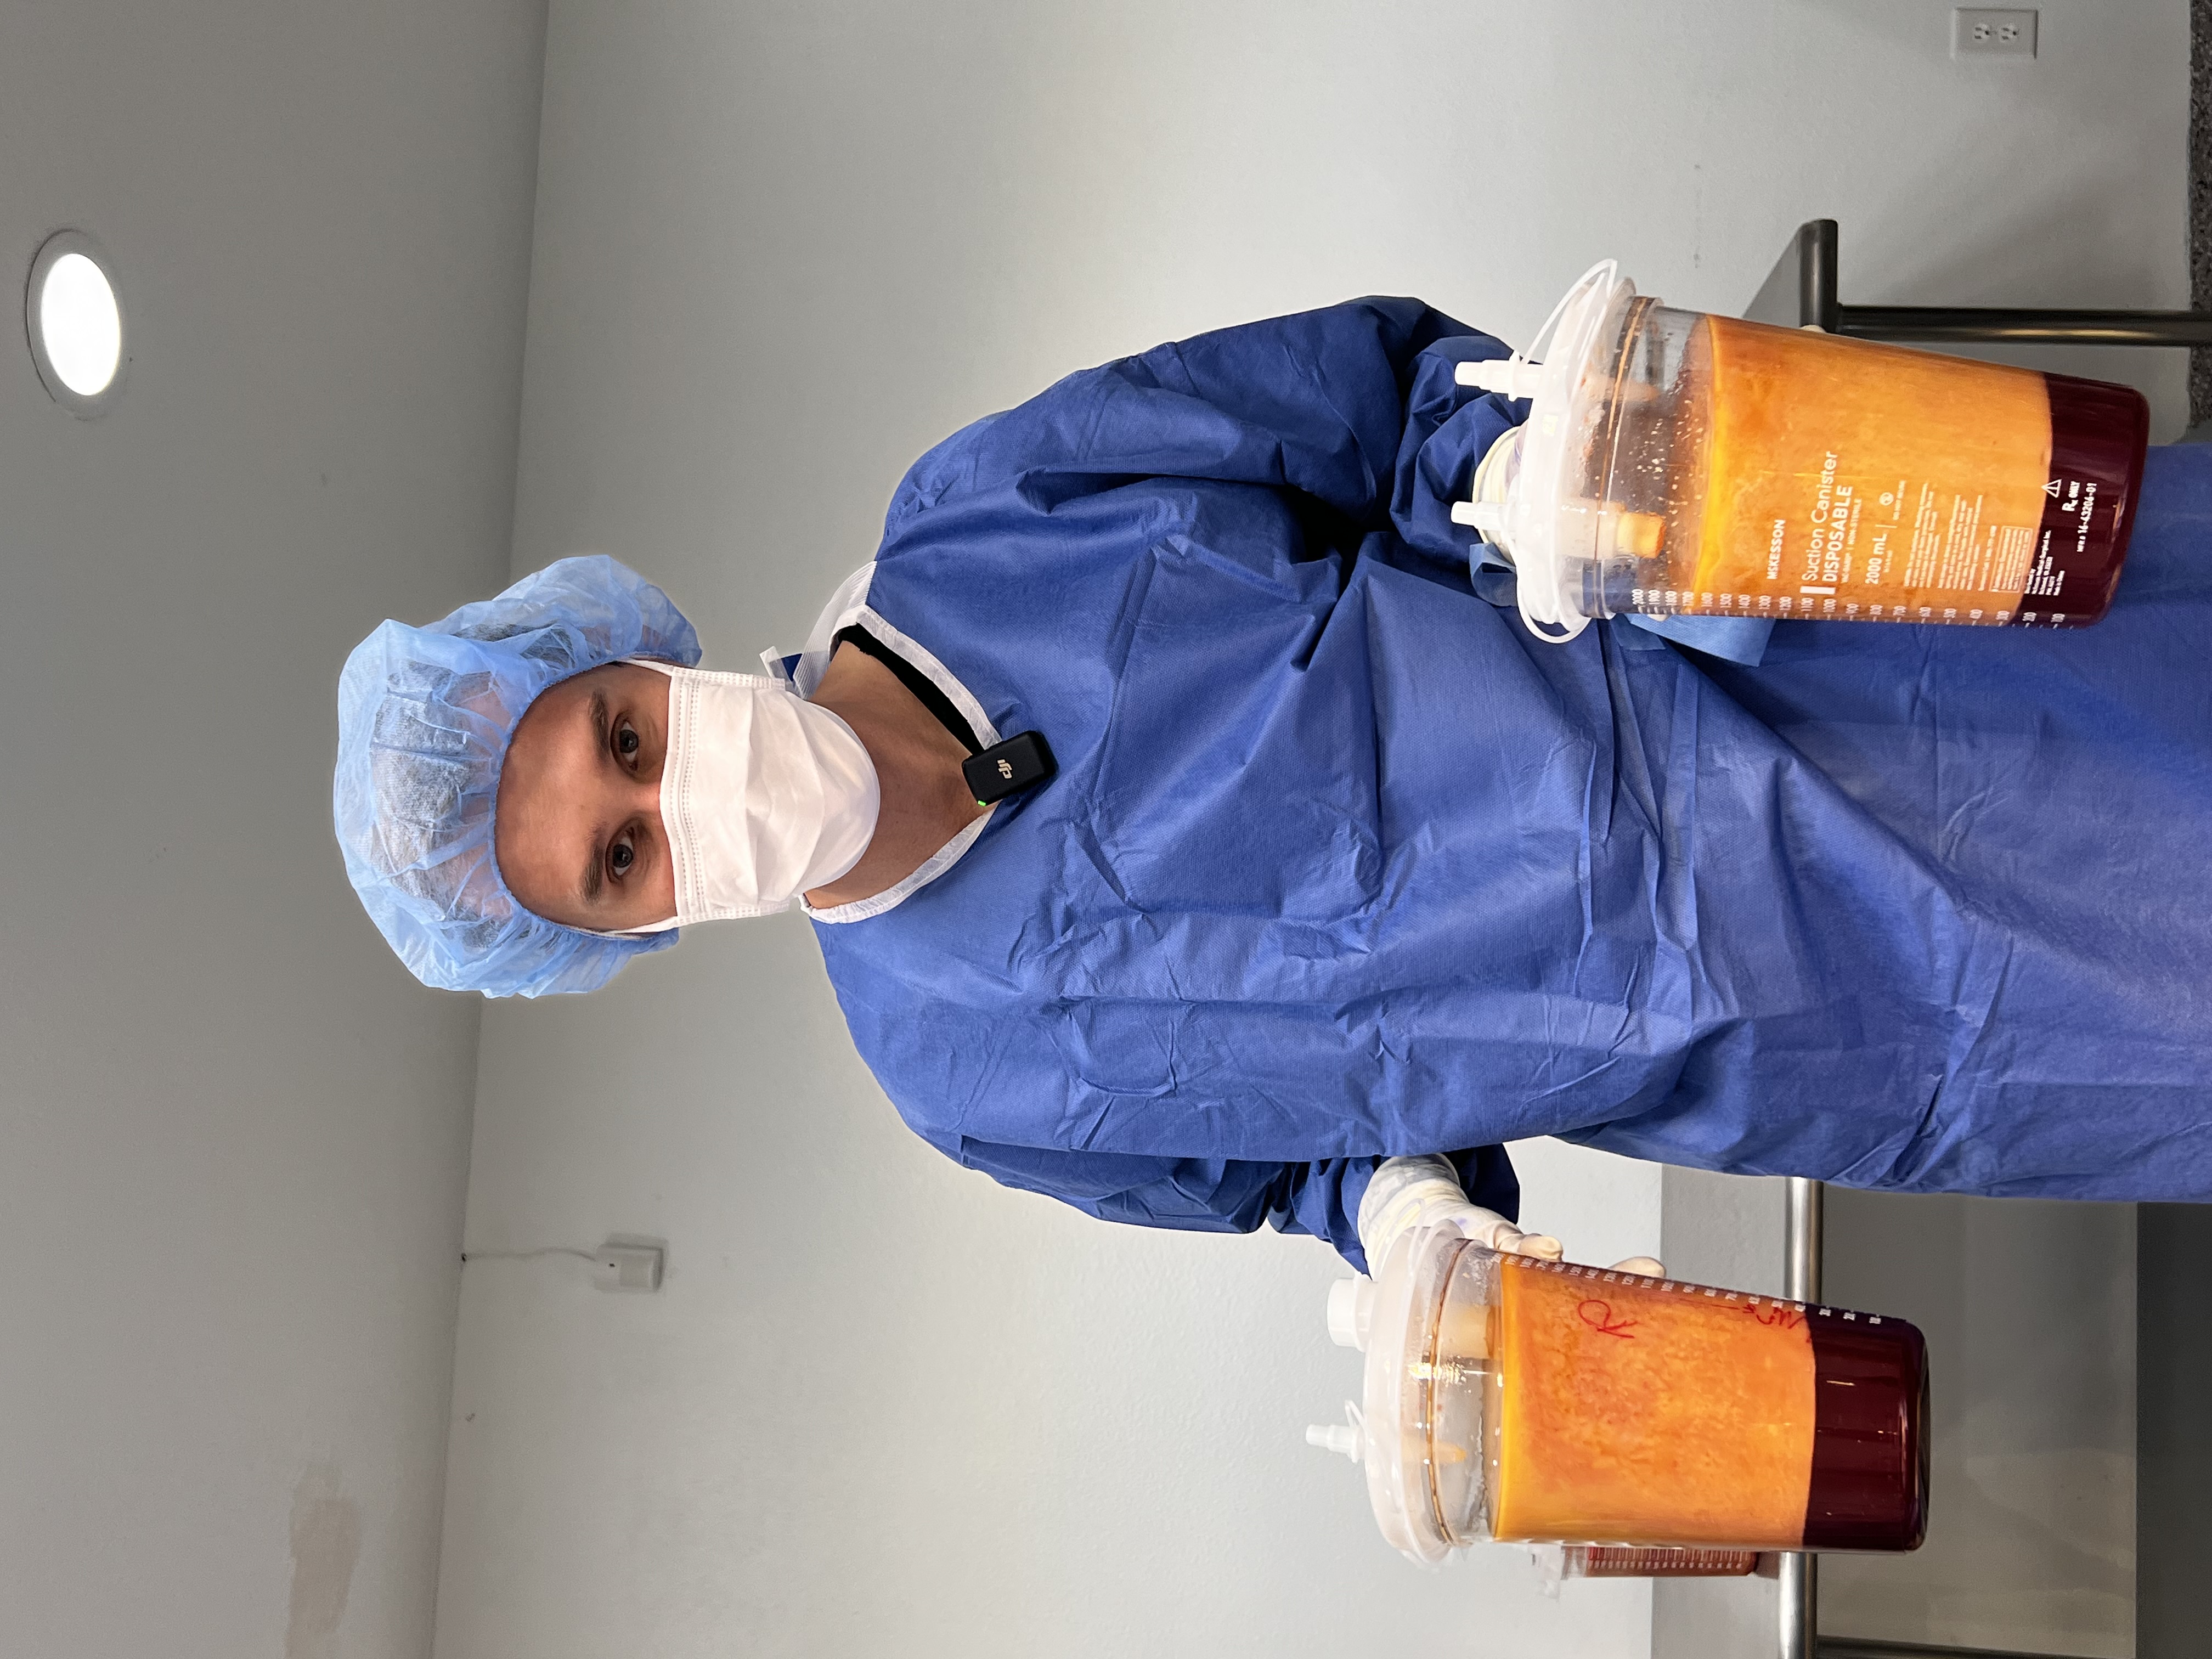 Dr. Markelov with pitchers of liposuctioned fat